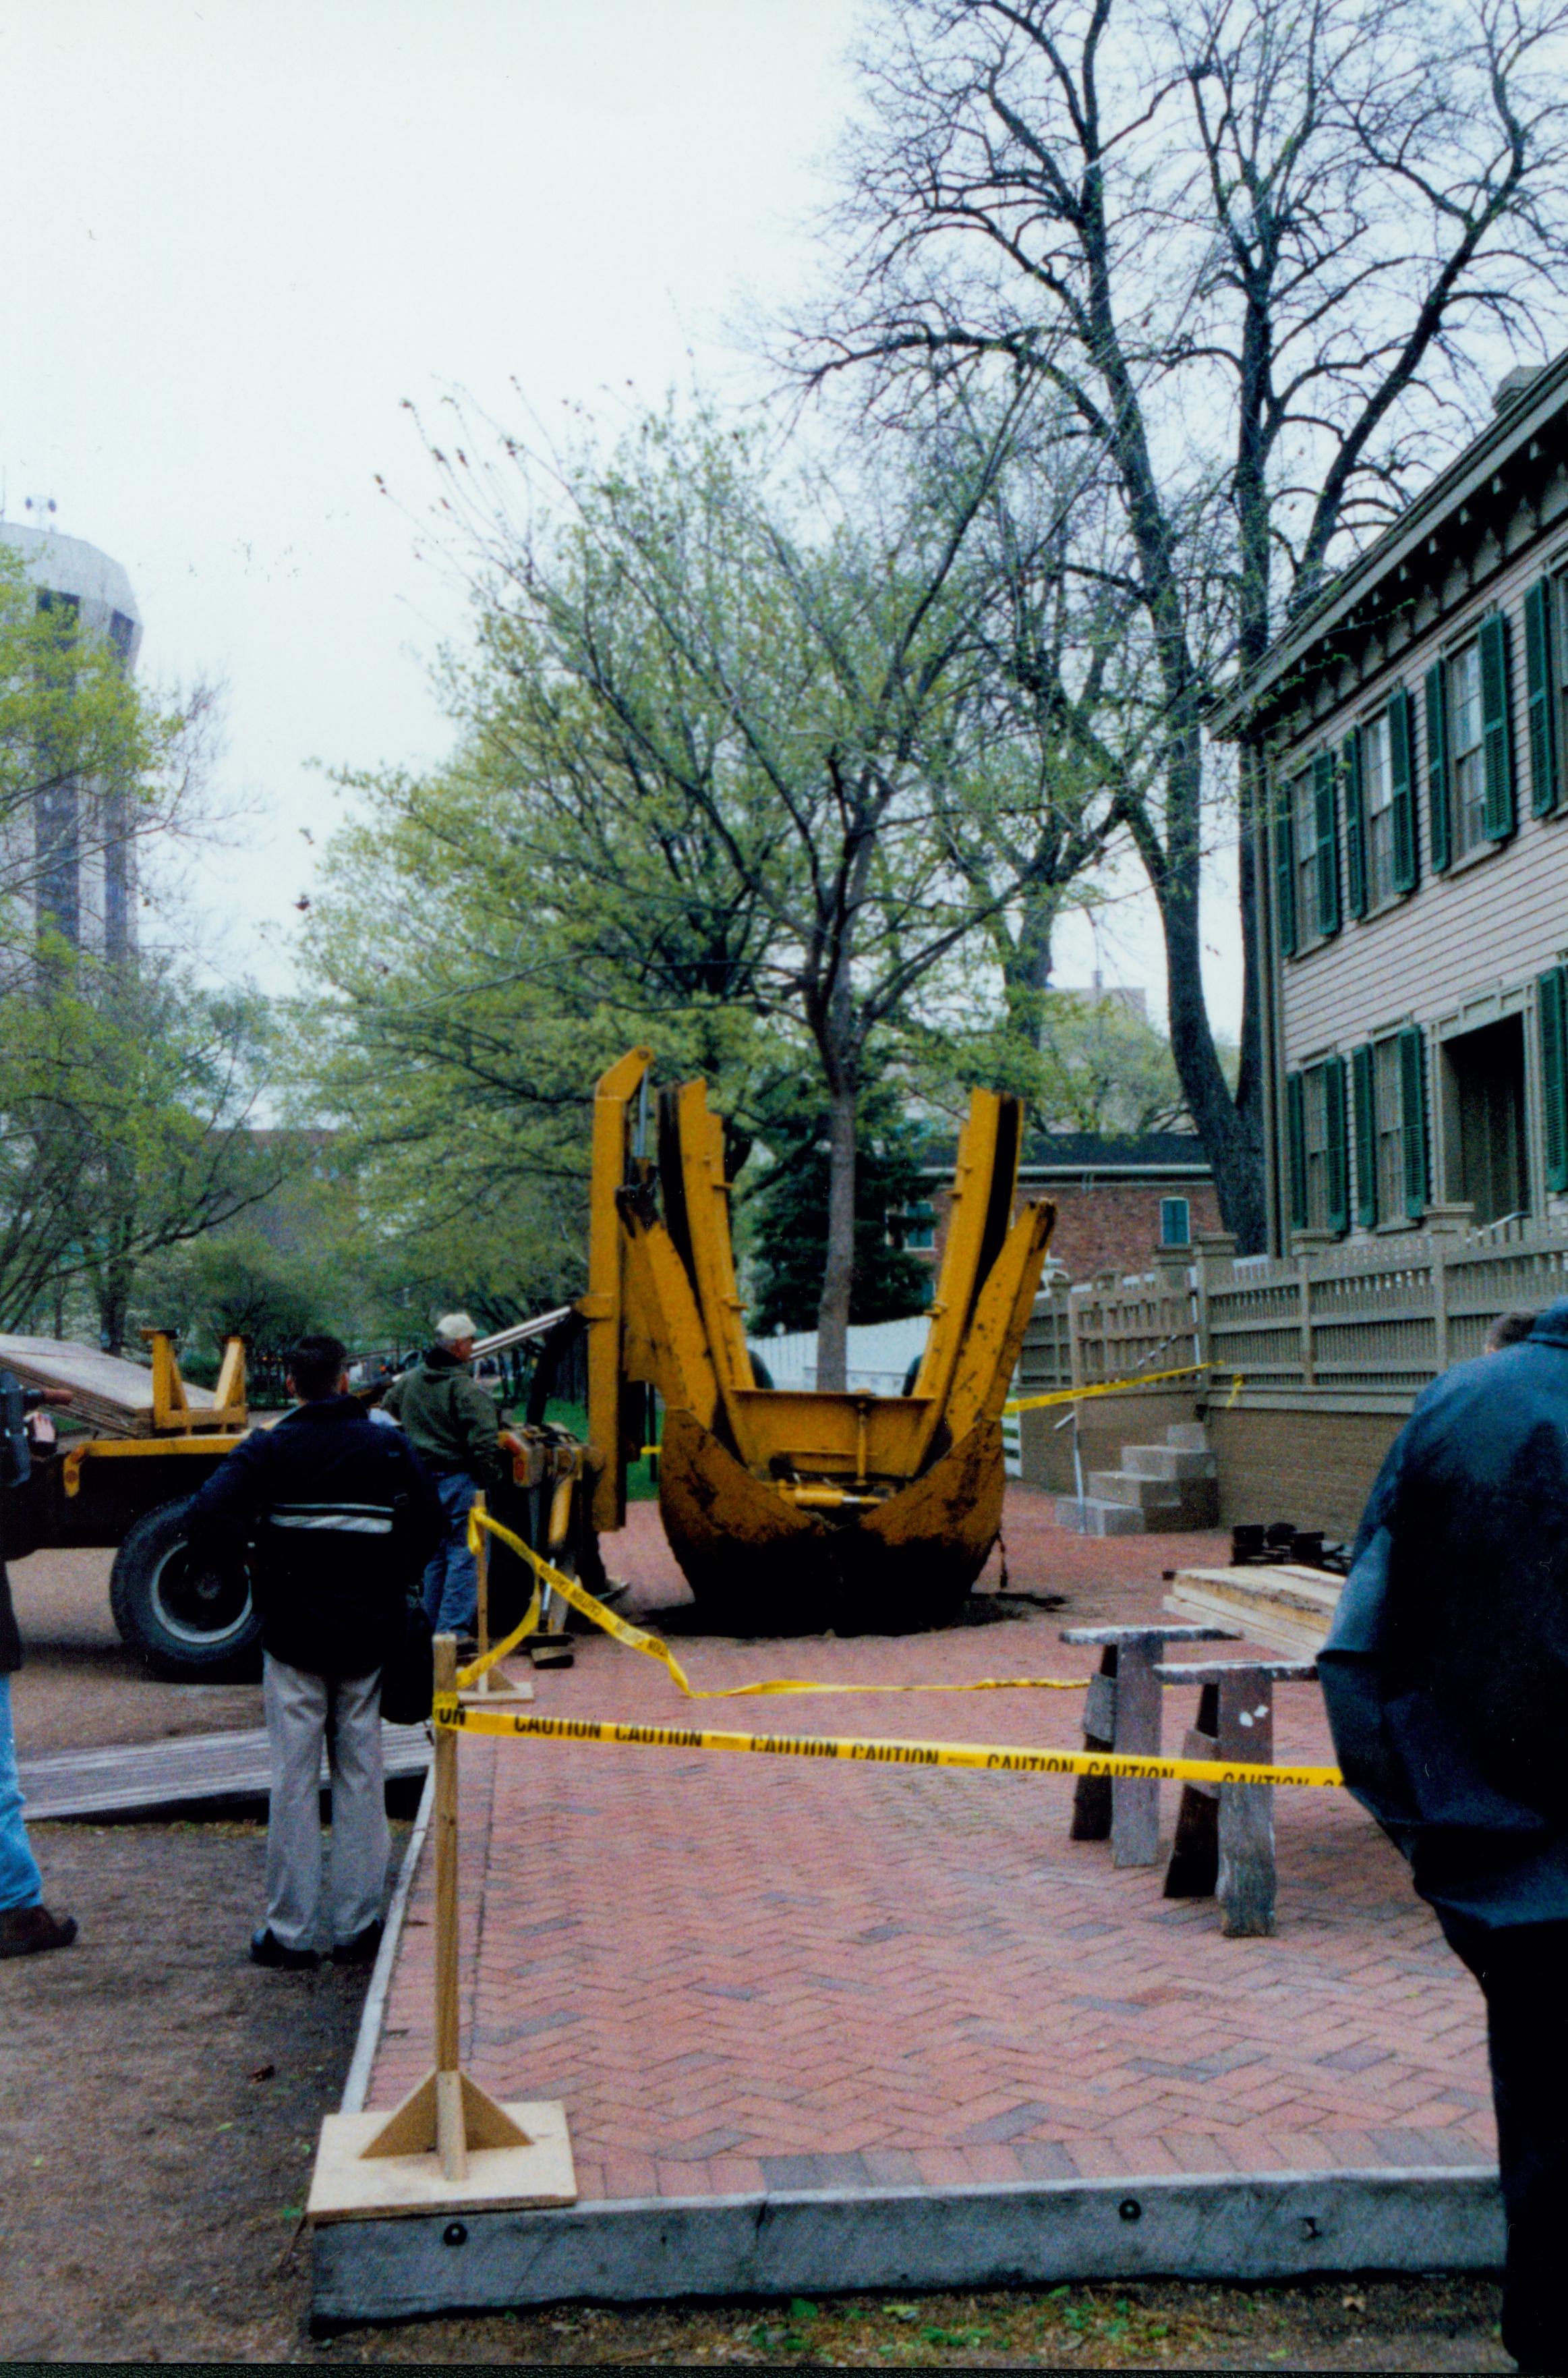 Elm tree replacement - Pleasant Nursery staff removing tree from brick plaza in front of Lincoln Home. Visitors and other nursery staff watch. Conference Center in background center. Hilton Hotel tower in background left. Looking north from 8th and Jackson Street intersection Elm tree, Lincoln Home, brick plaza, Pleasant Nursery, visitors, Conference Center, Hilton Hotel